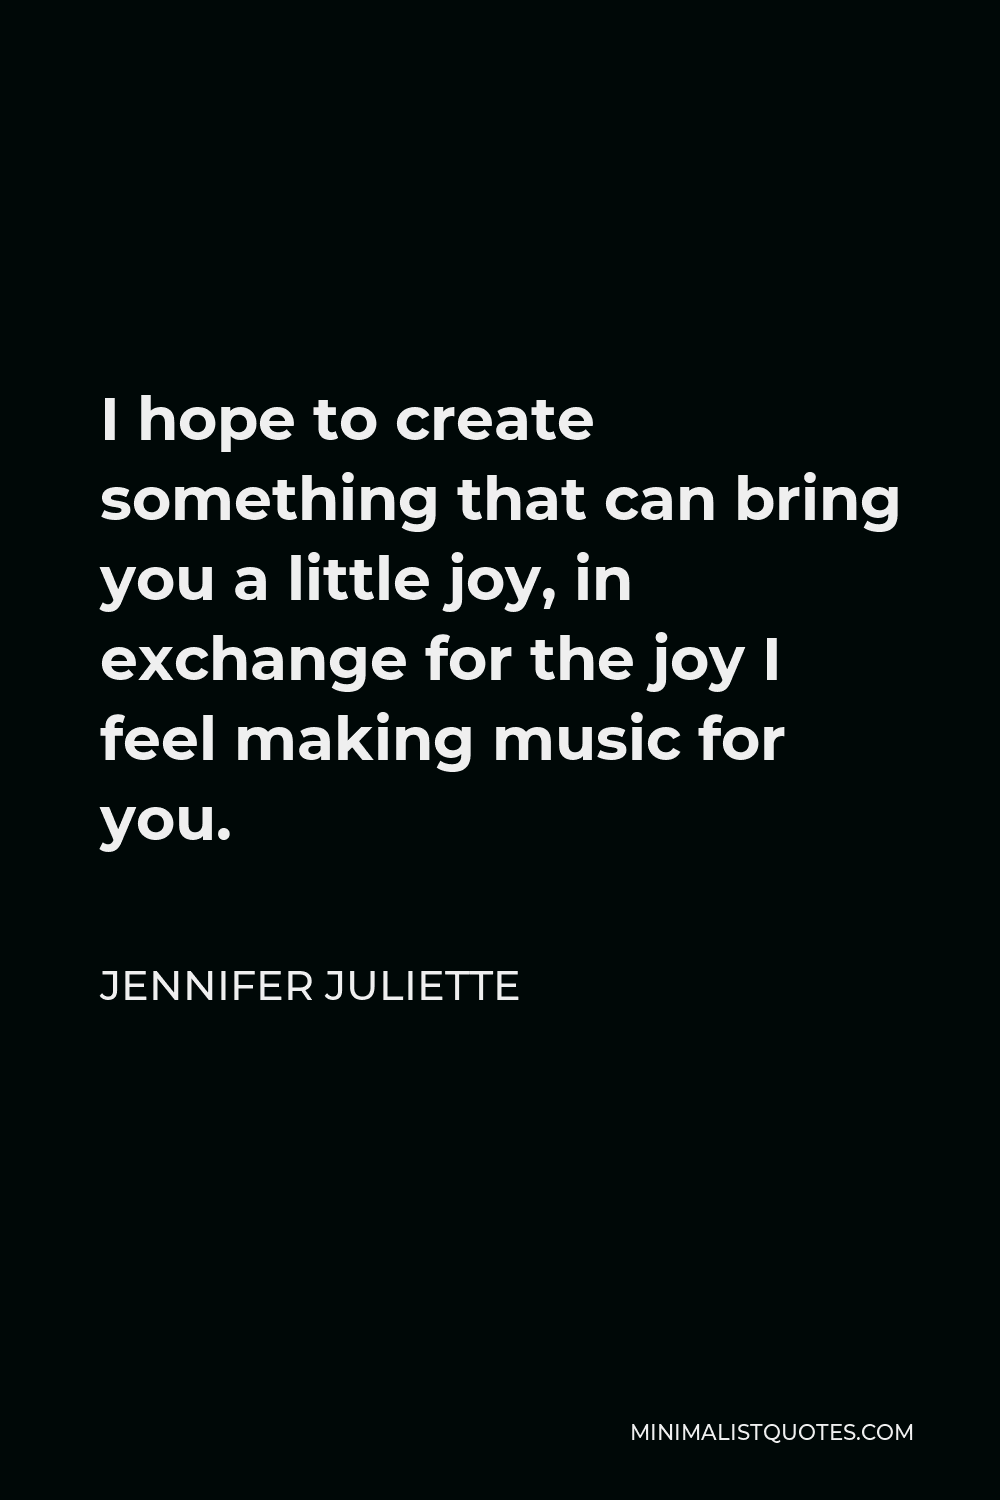 Jennifer Juliette Quote - I hope to create something that can bring you a little joy, in exchange for the joy I feel making music for you.